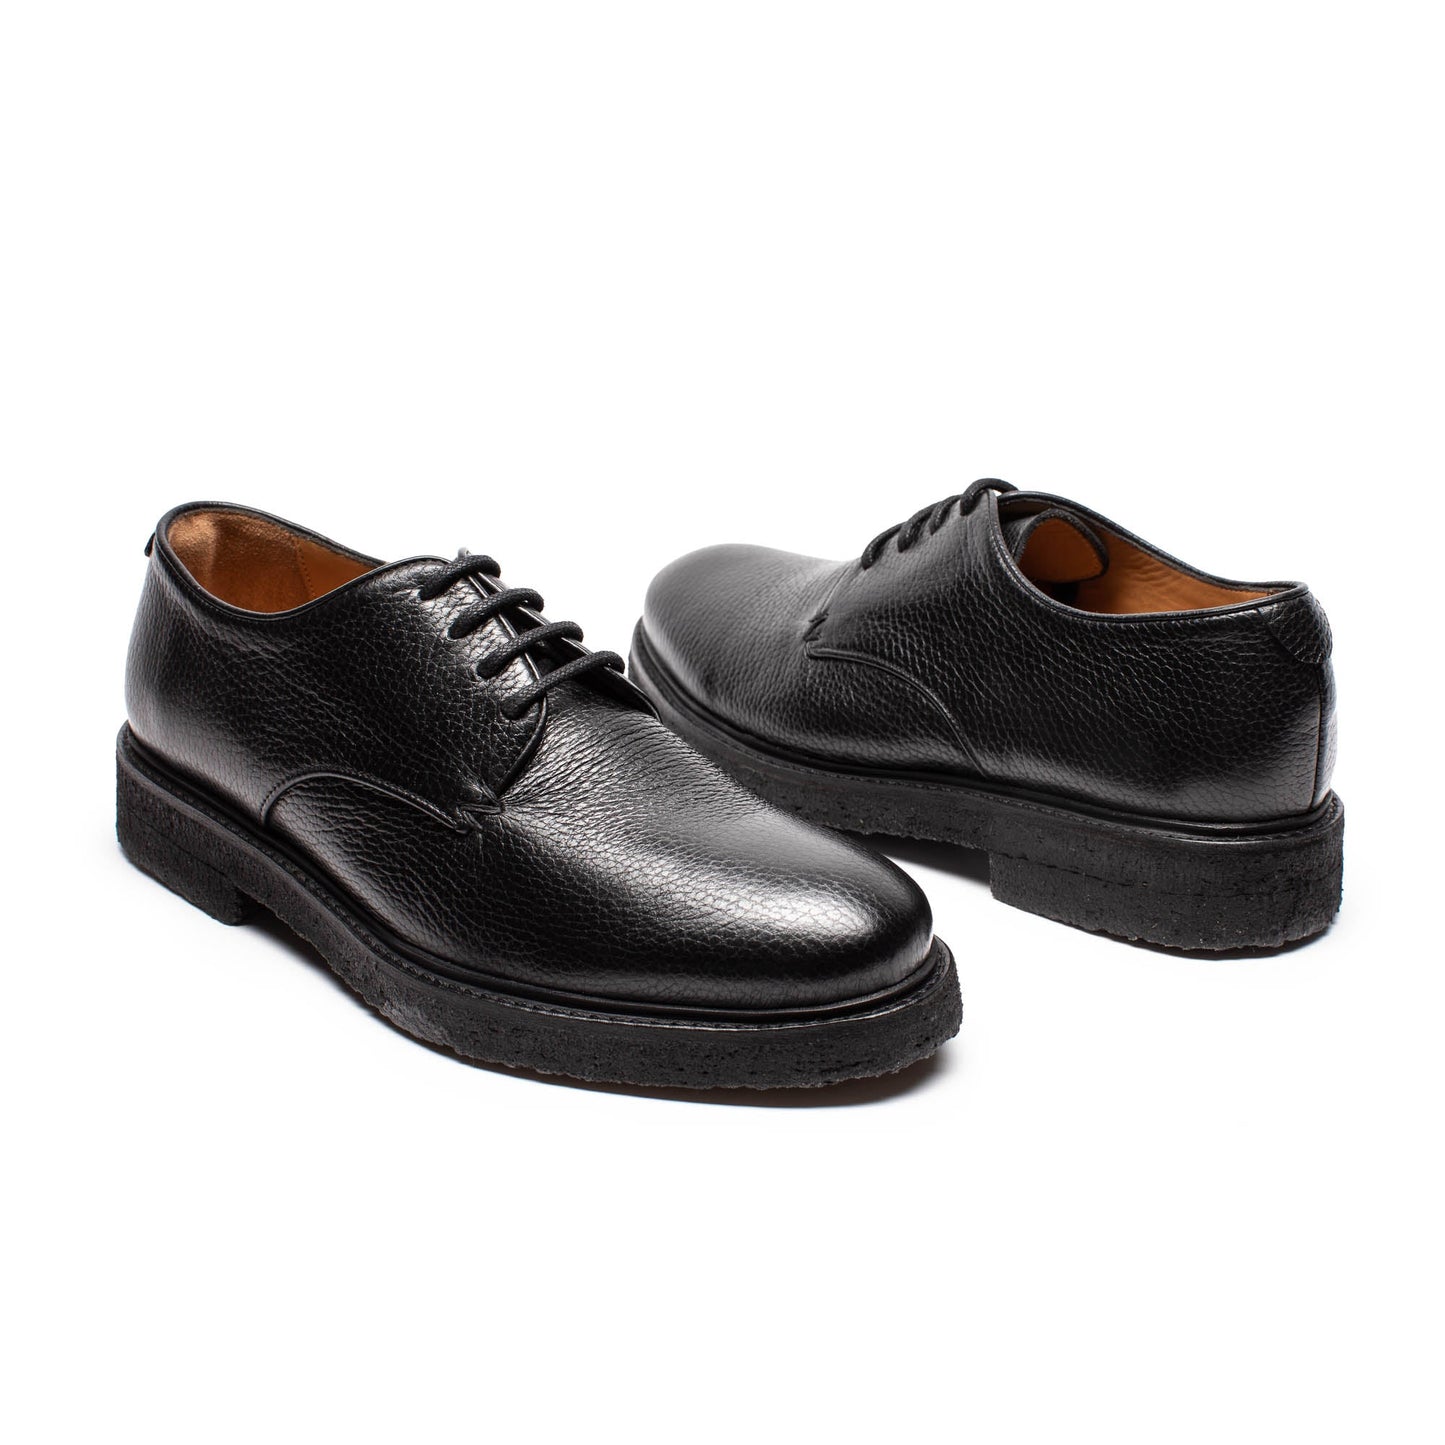 Womens black grained leather derby shoe perfect for walking and everyday use by designer Tracey Neuls